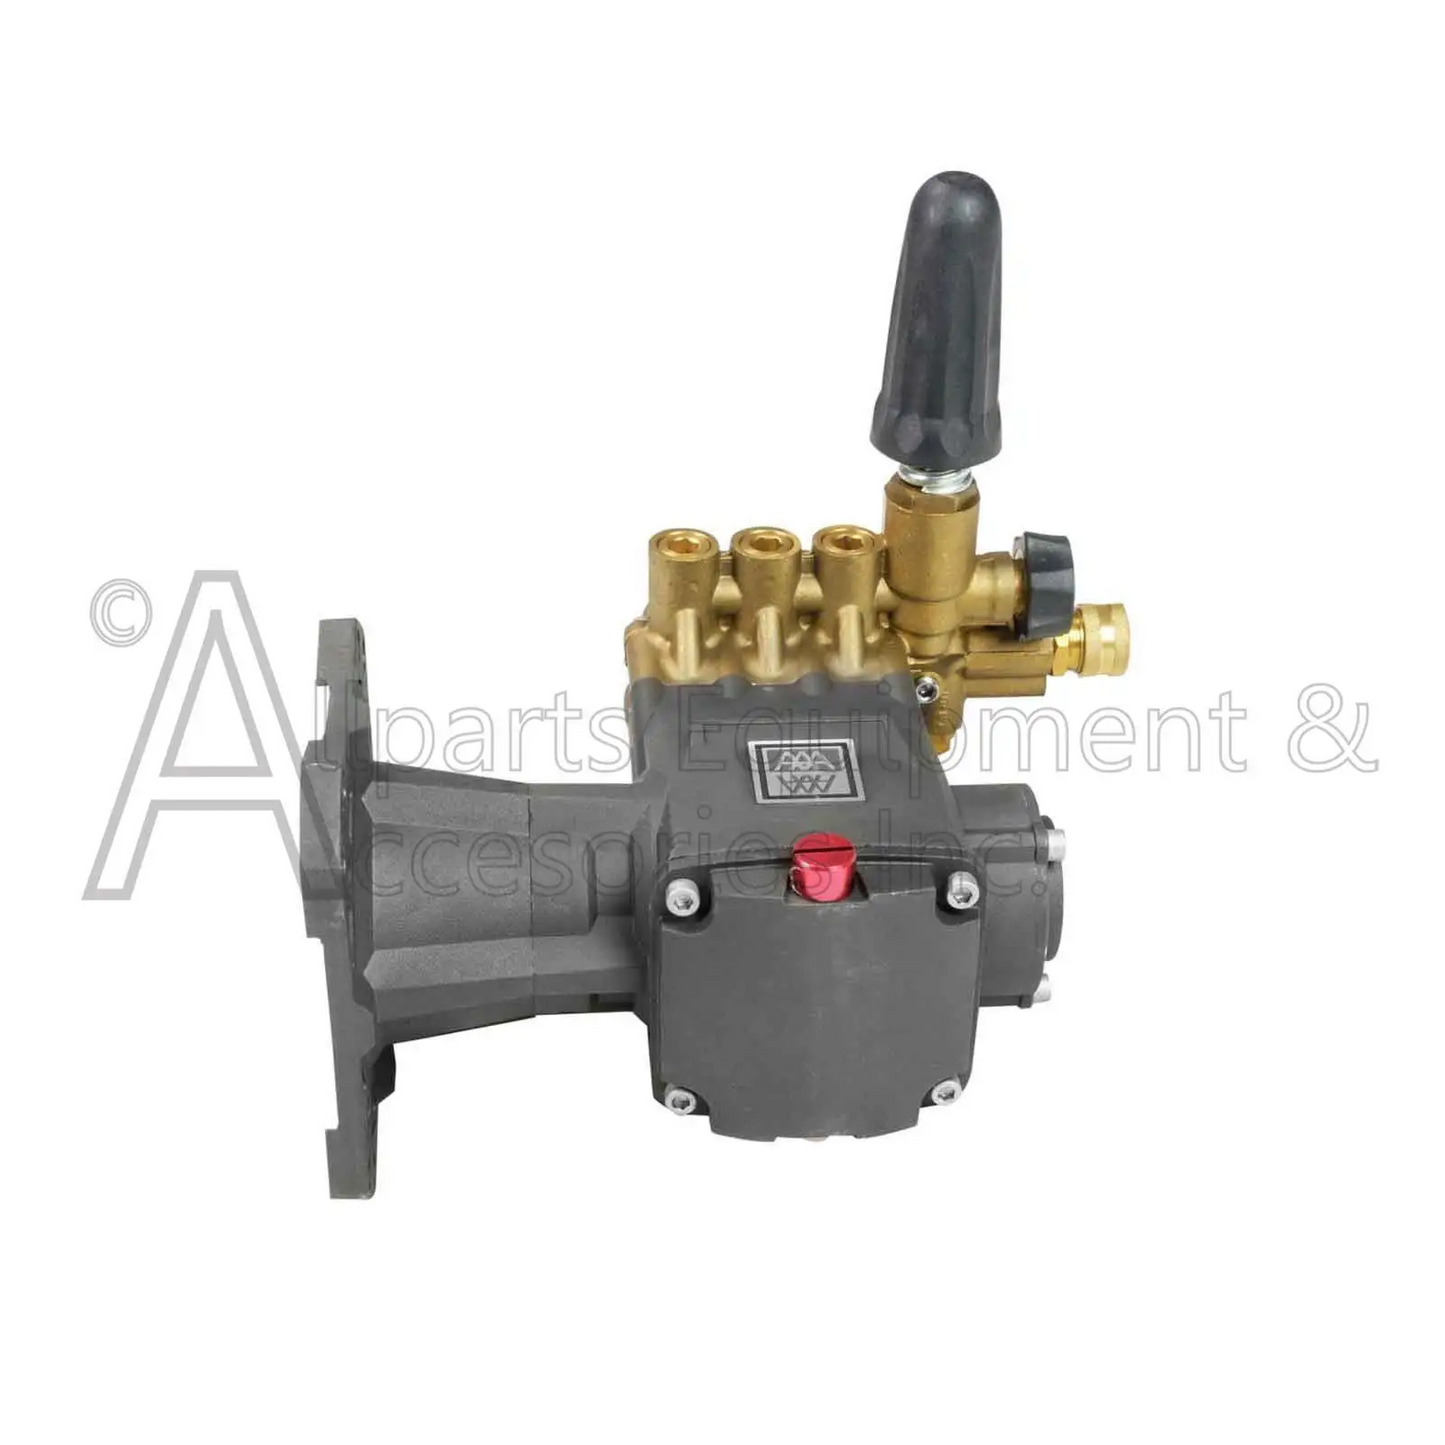 7109342 C45 Aaa Pump Service Assembly